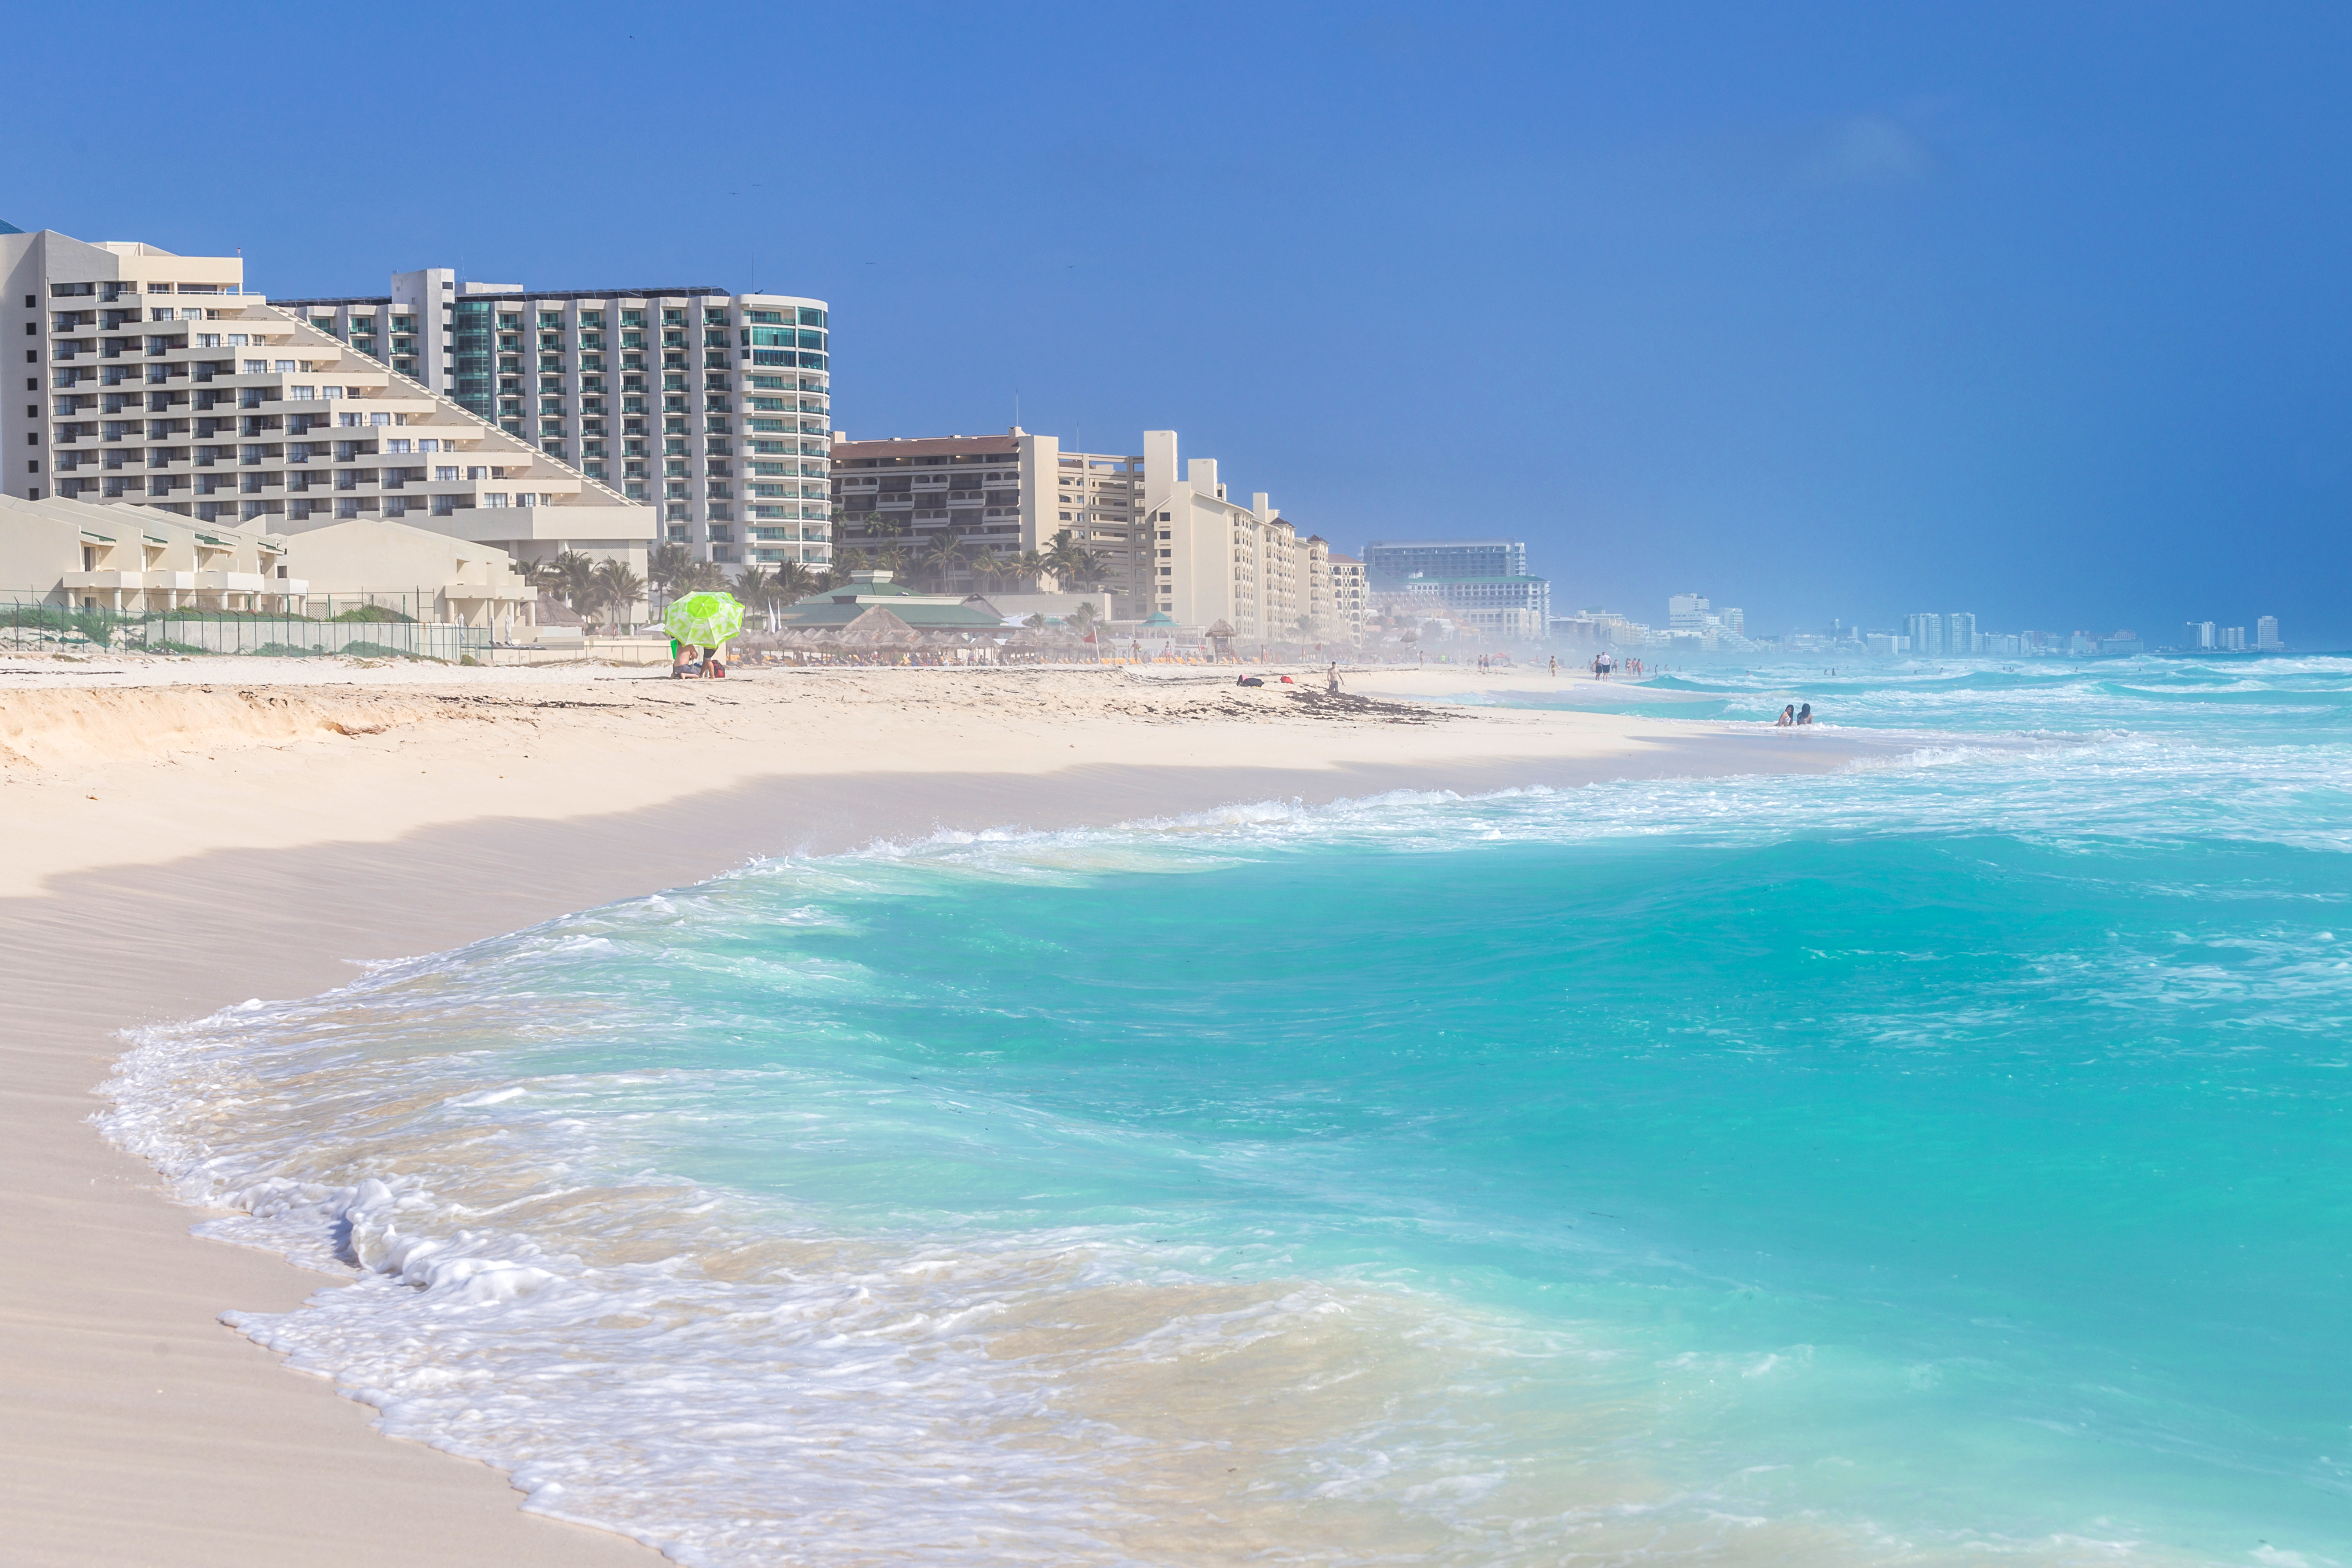 Vacation Express Returns to Memphis with Non-Stop Flights to Cancun